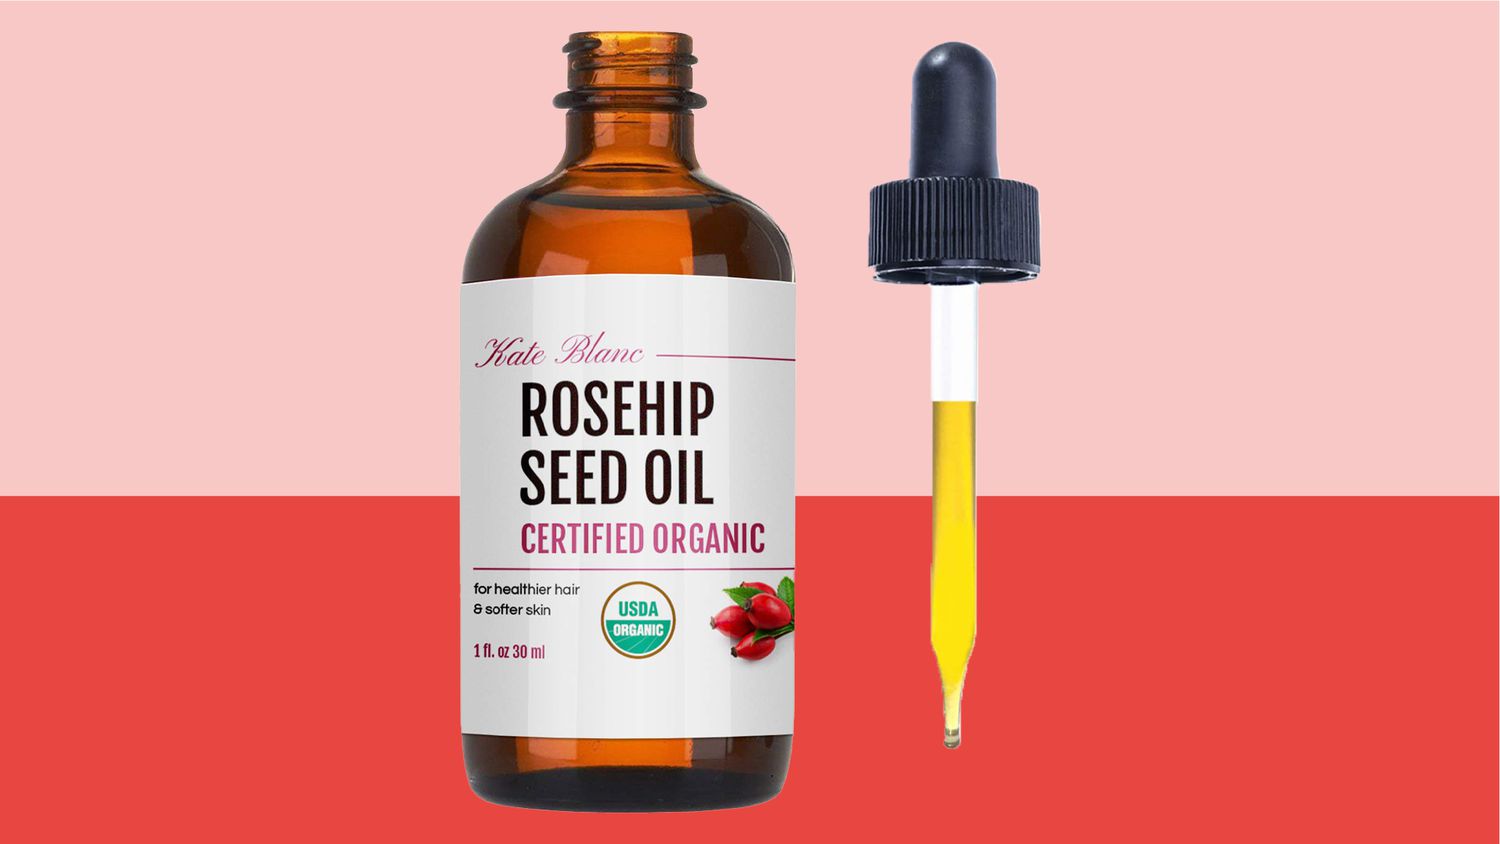 Rosehip Seed Oil for Face and Skin by Kate Blanc